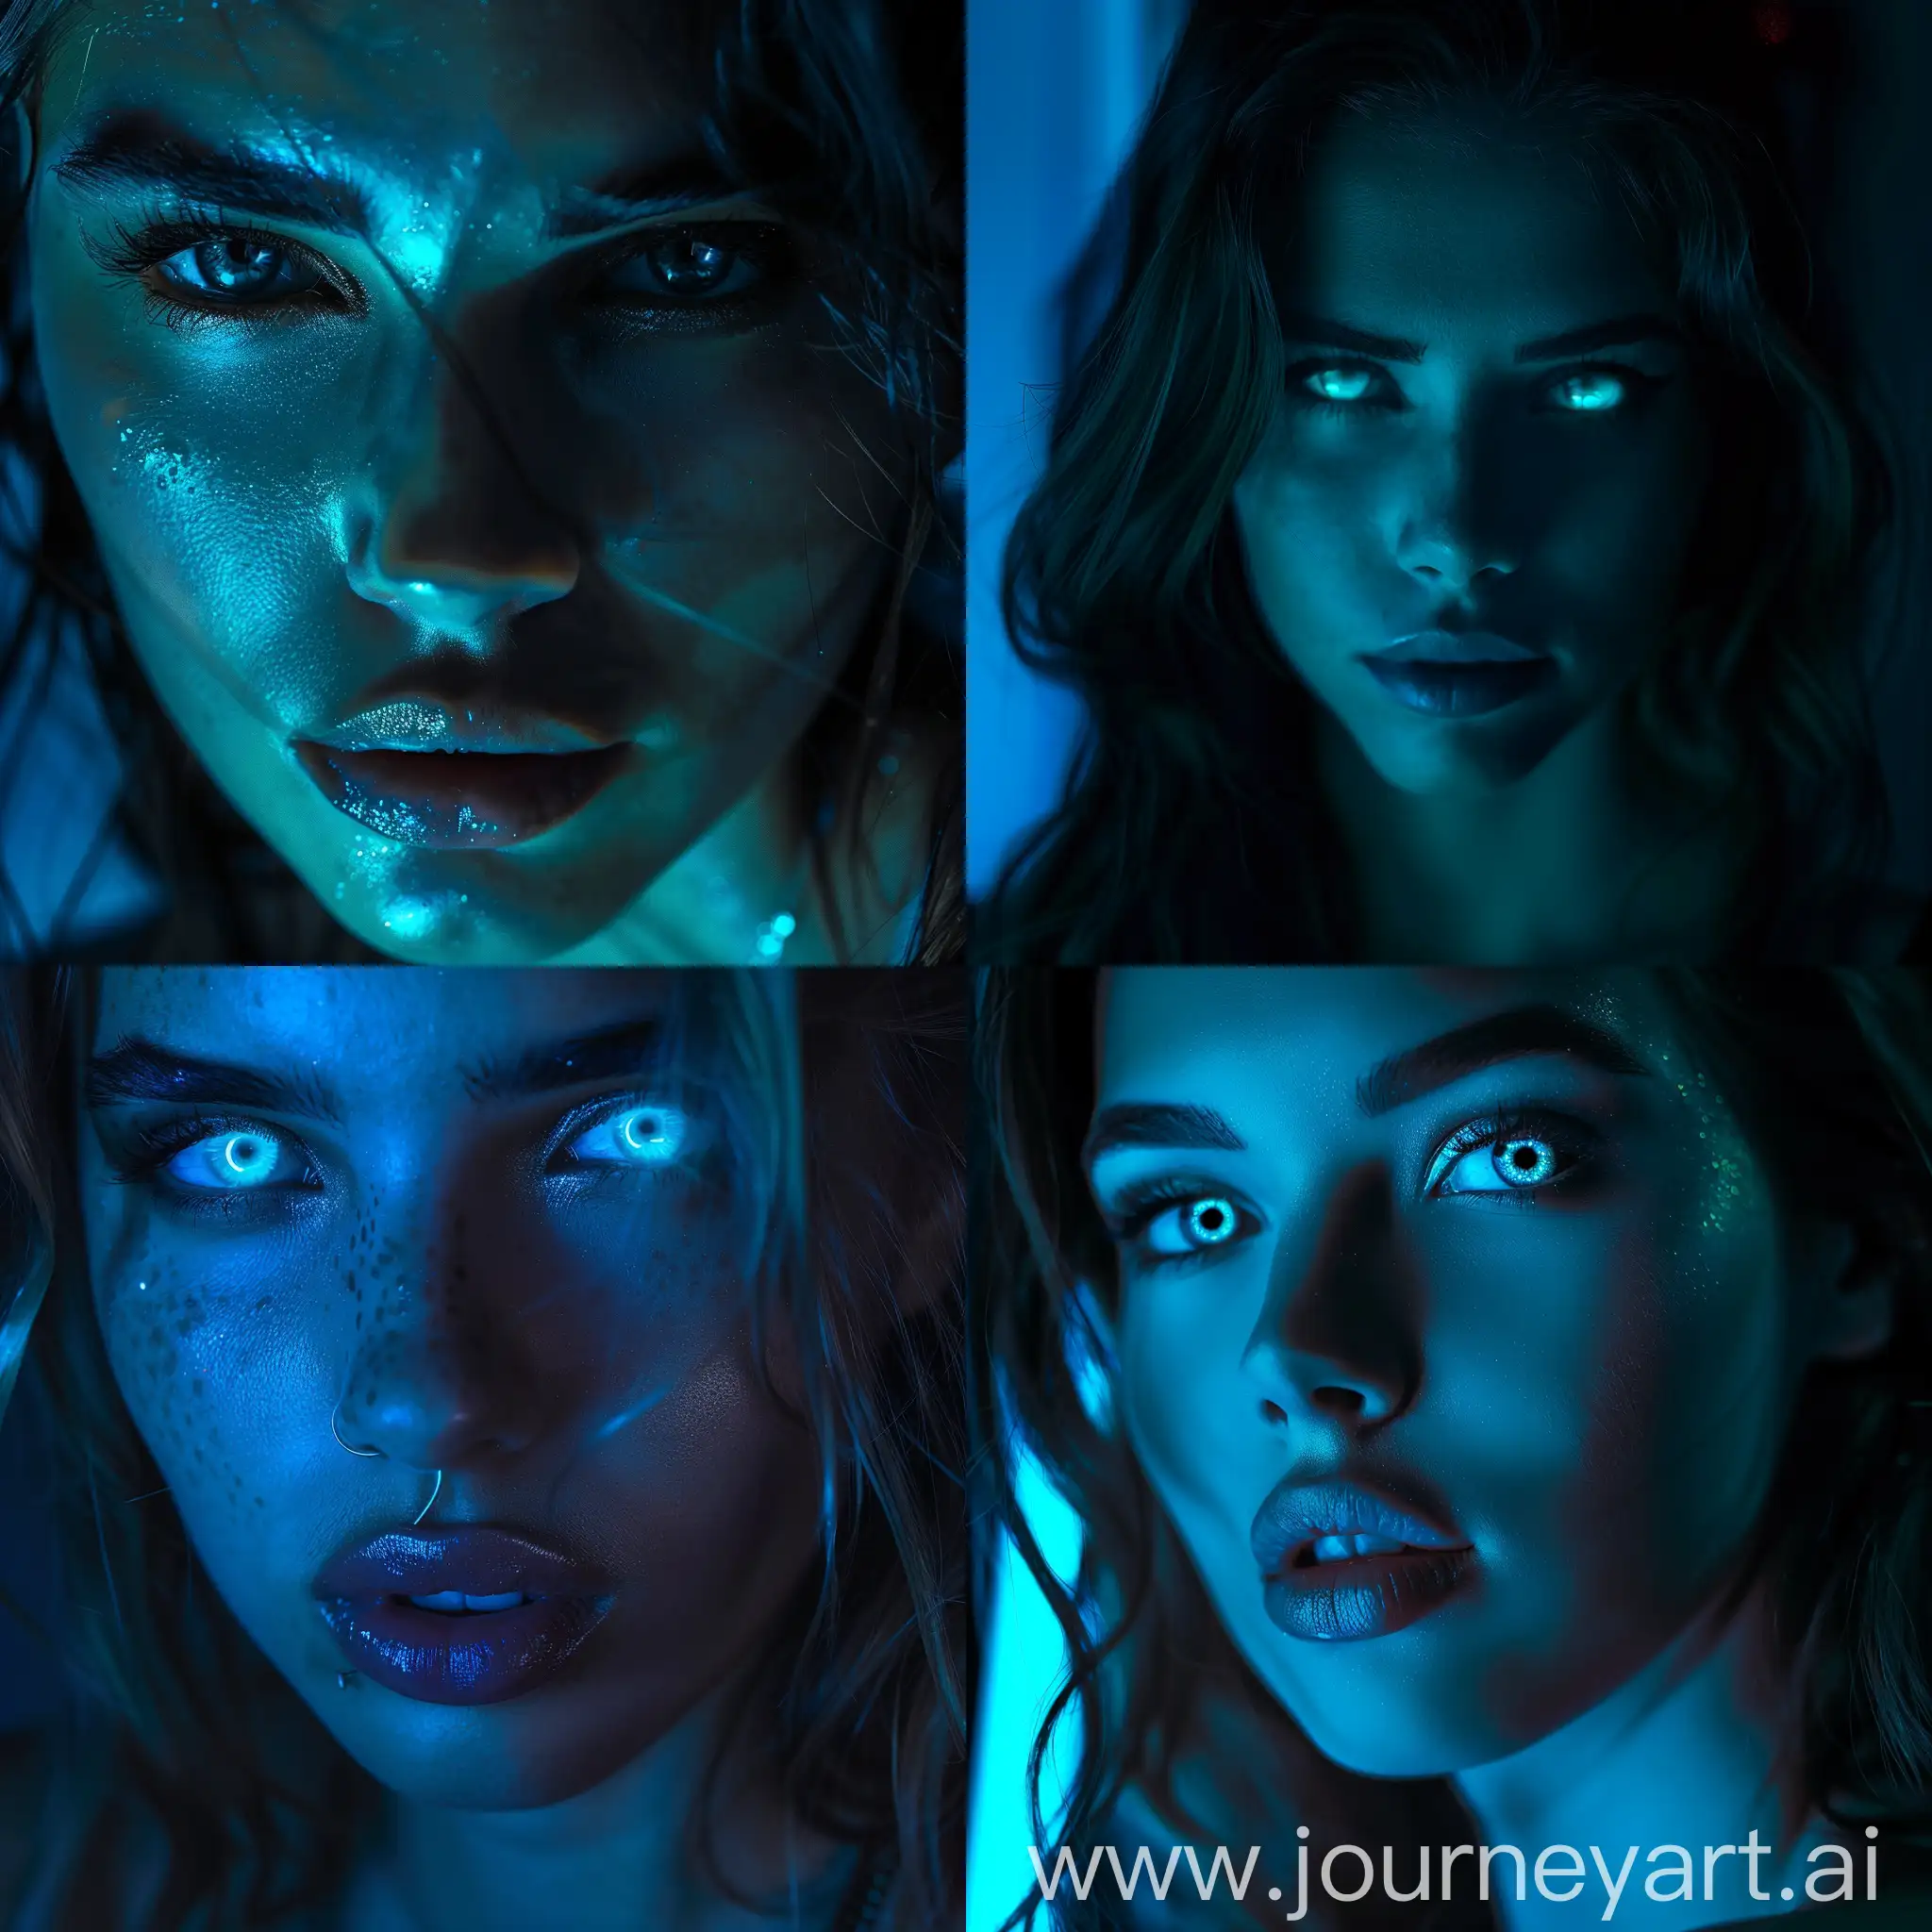 beautifull hot girl in dark backgroud , on girl face some blue neon light, front face , dramatic pic , dramatic glow eyes, dark tone theme 